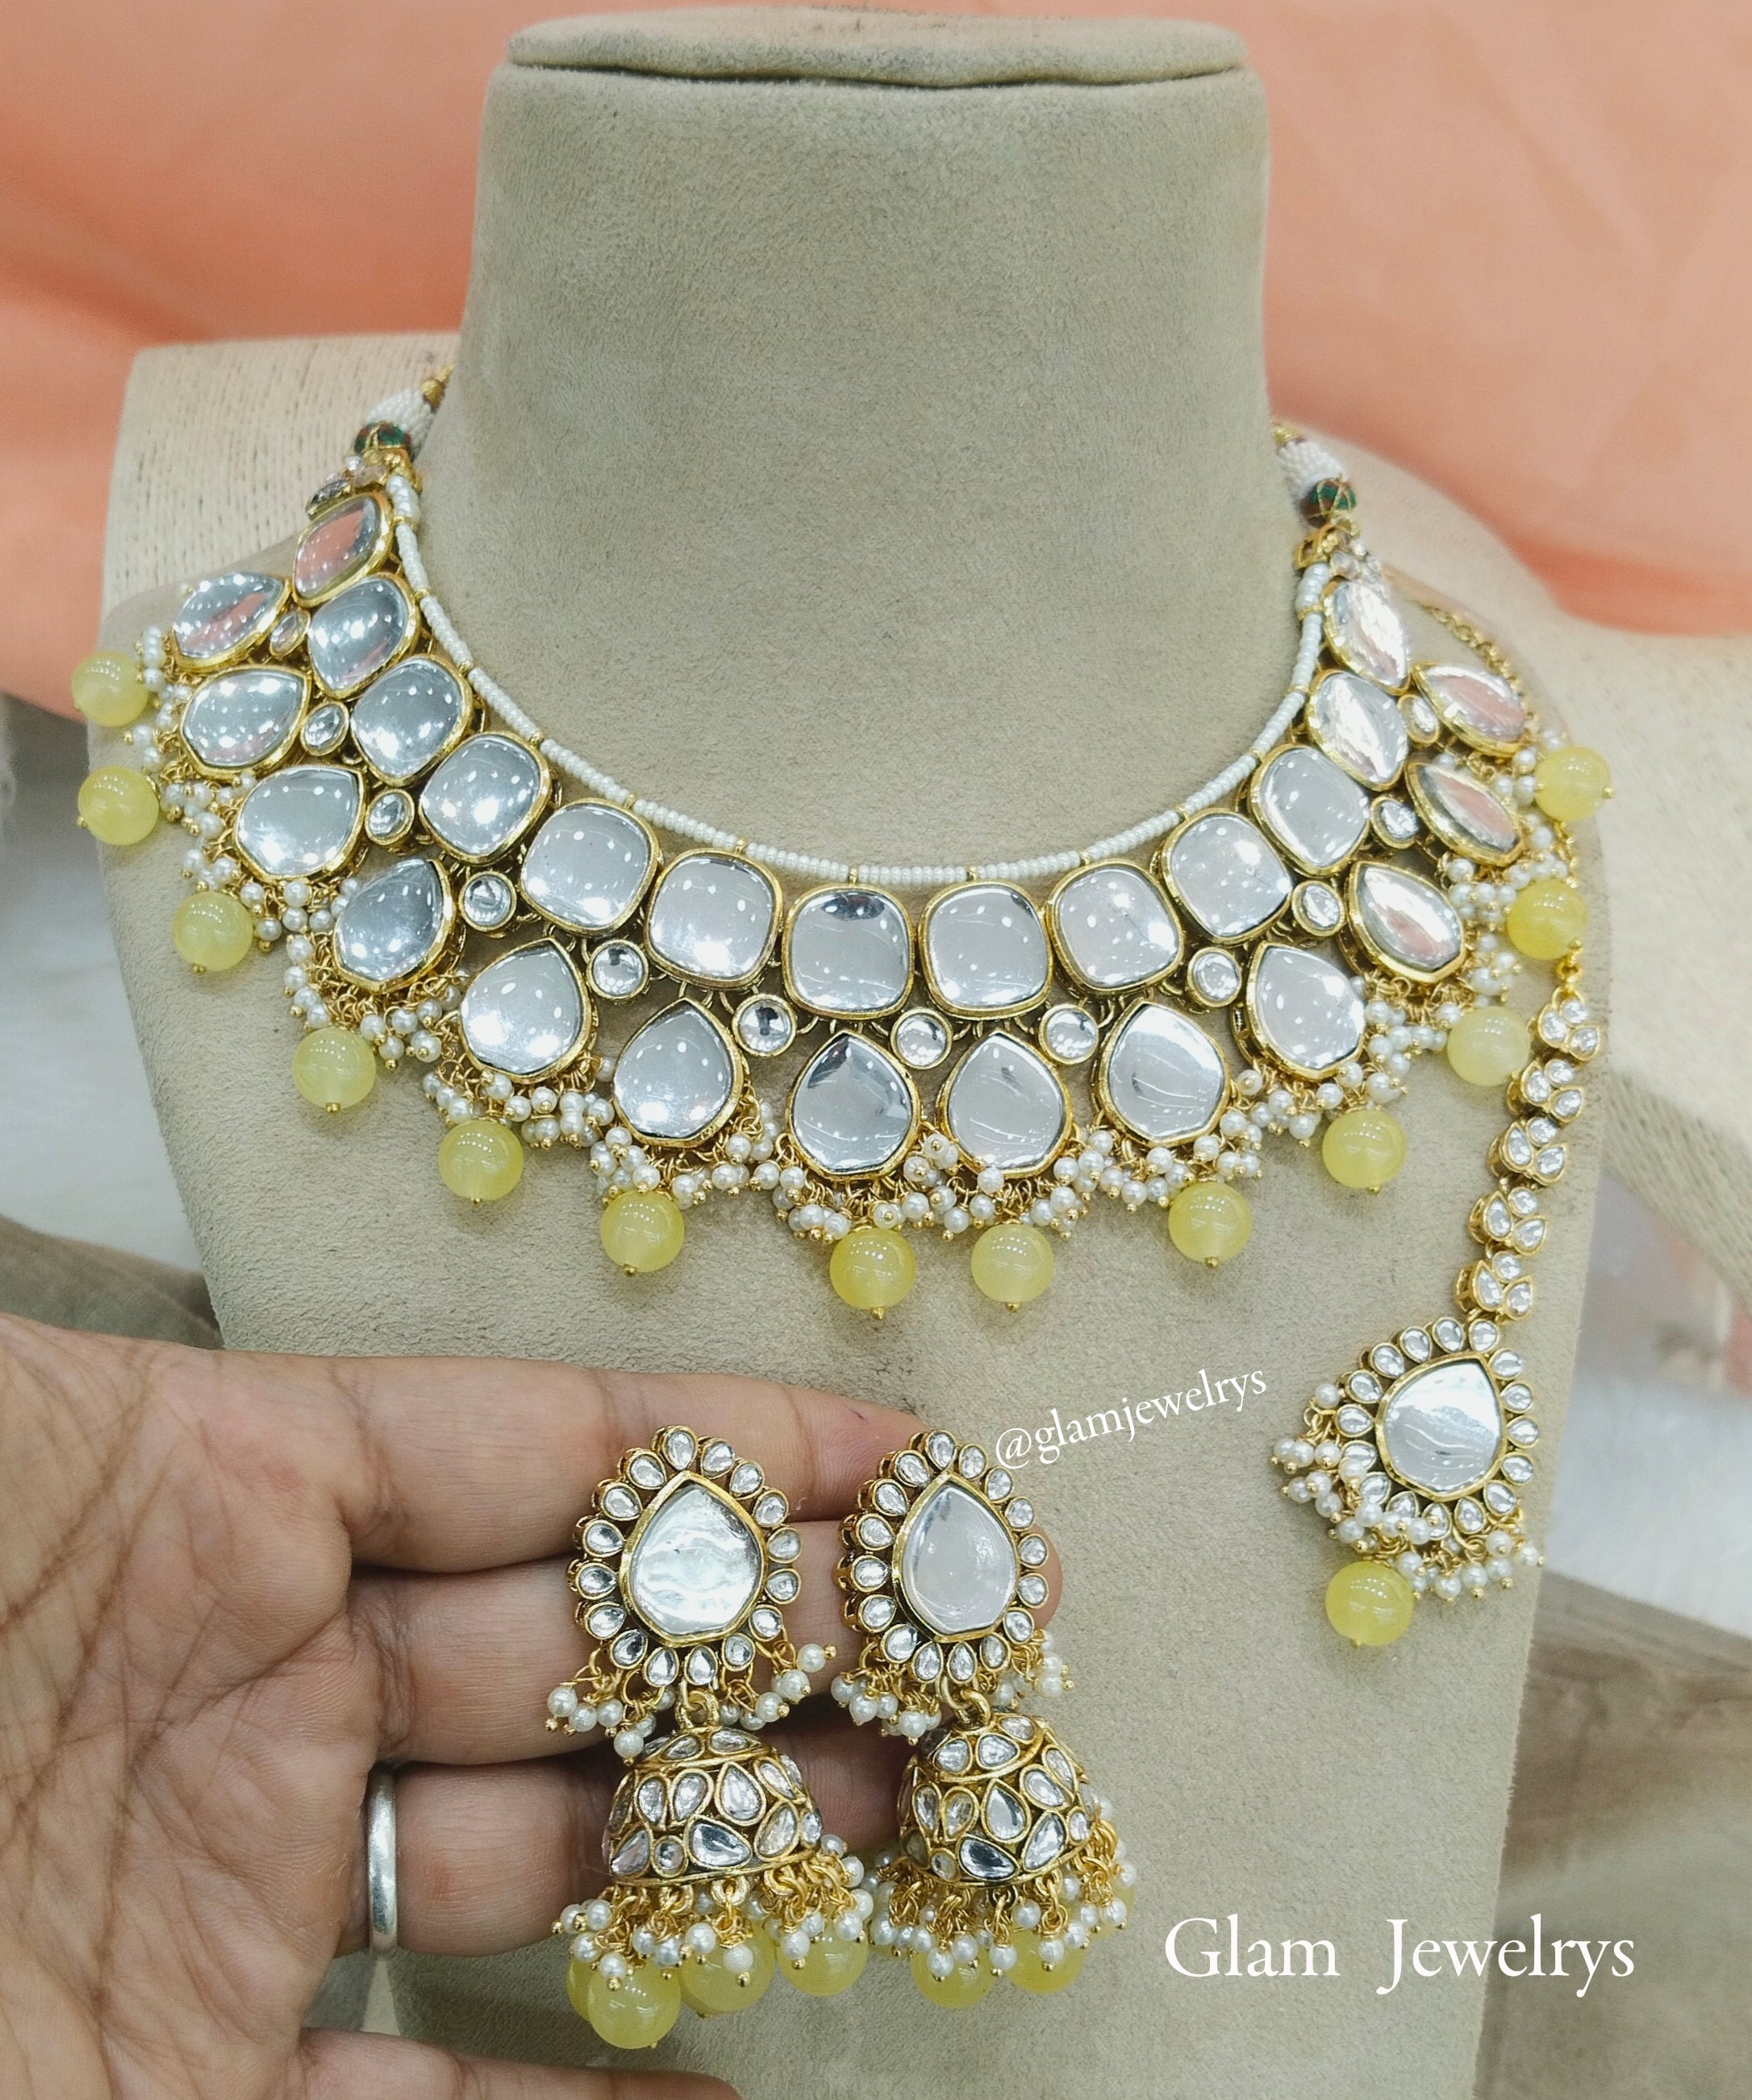 Golden Kundan Necklace Set with Green Pearls